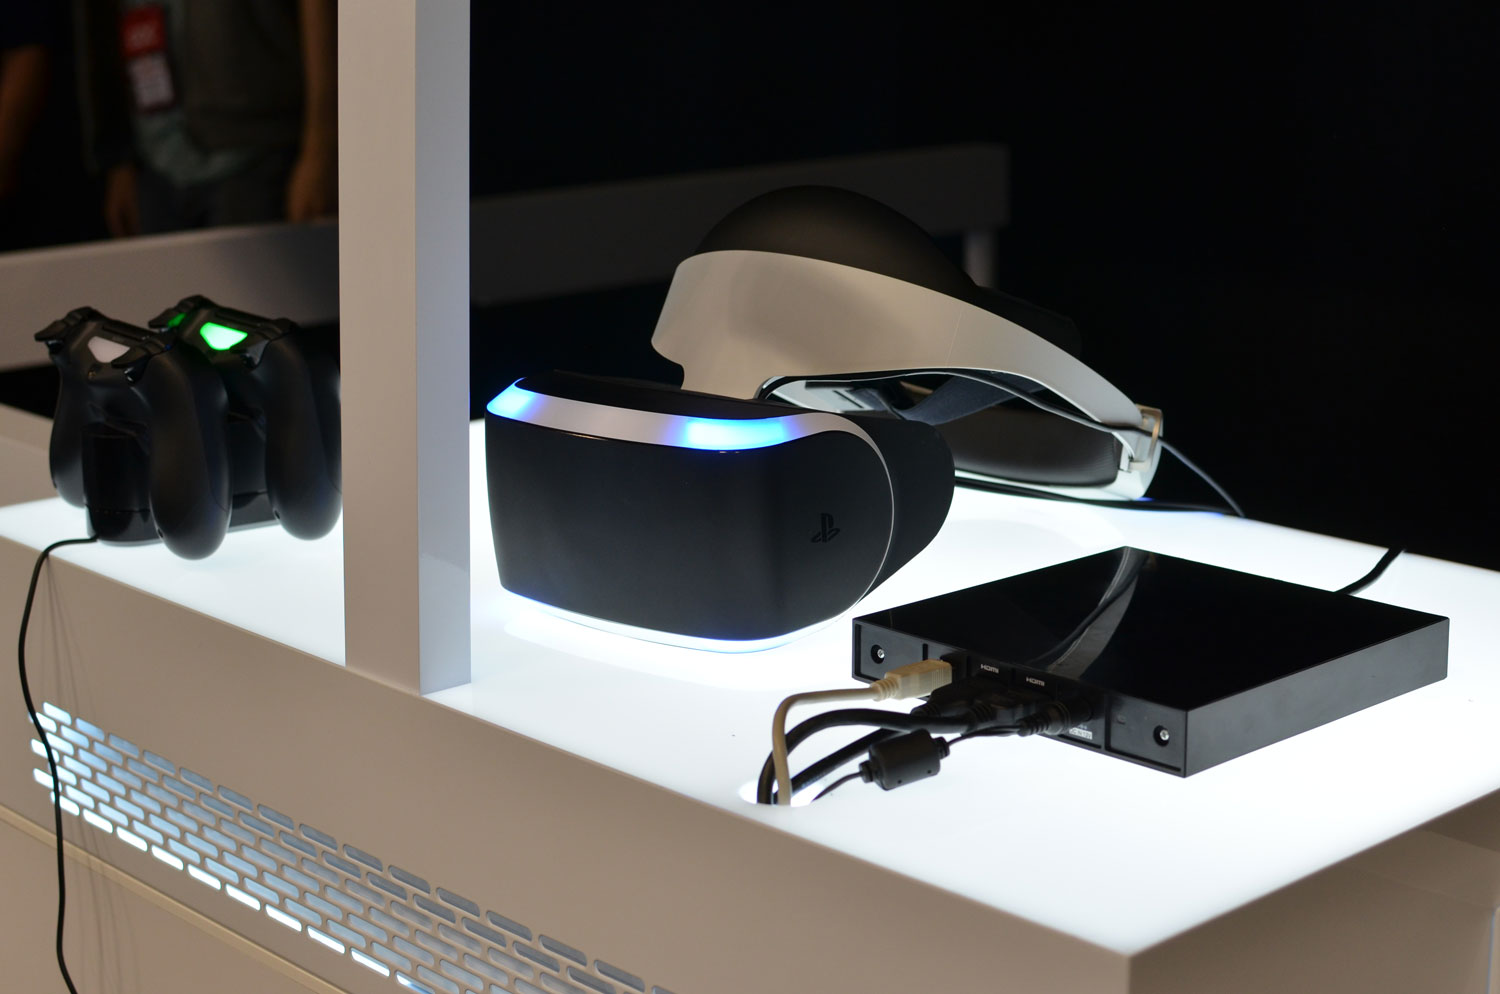 sony-ps4-vr-headset-project-morpheus-hands-on-gdc-2014.jpg